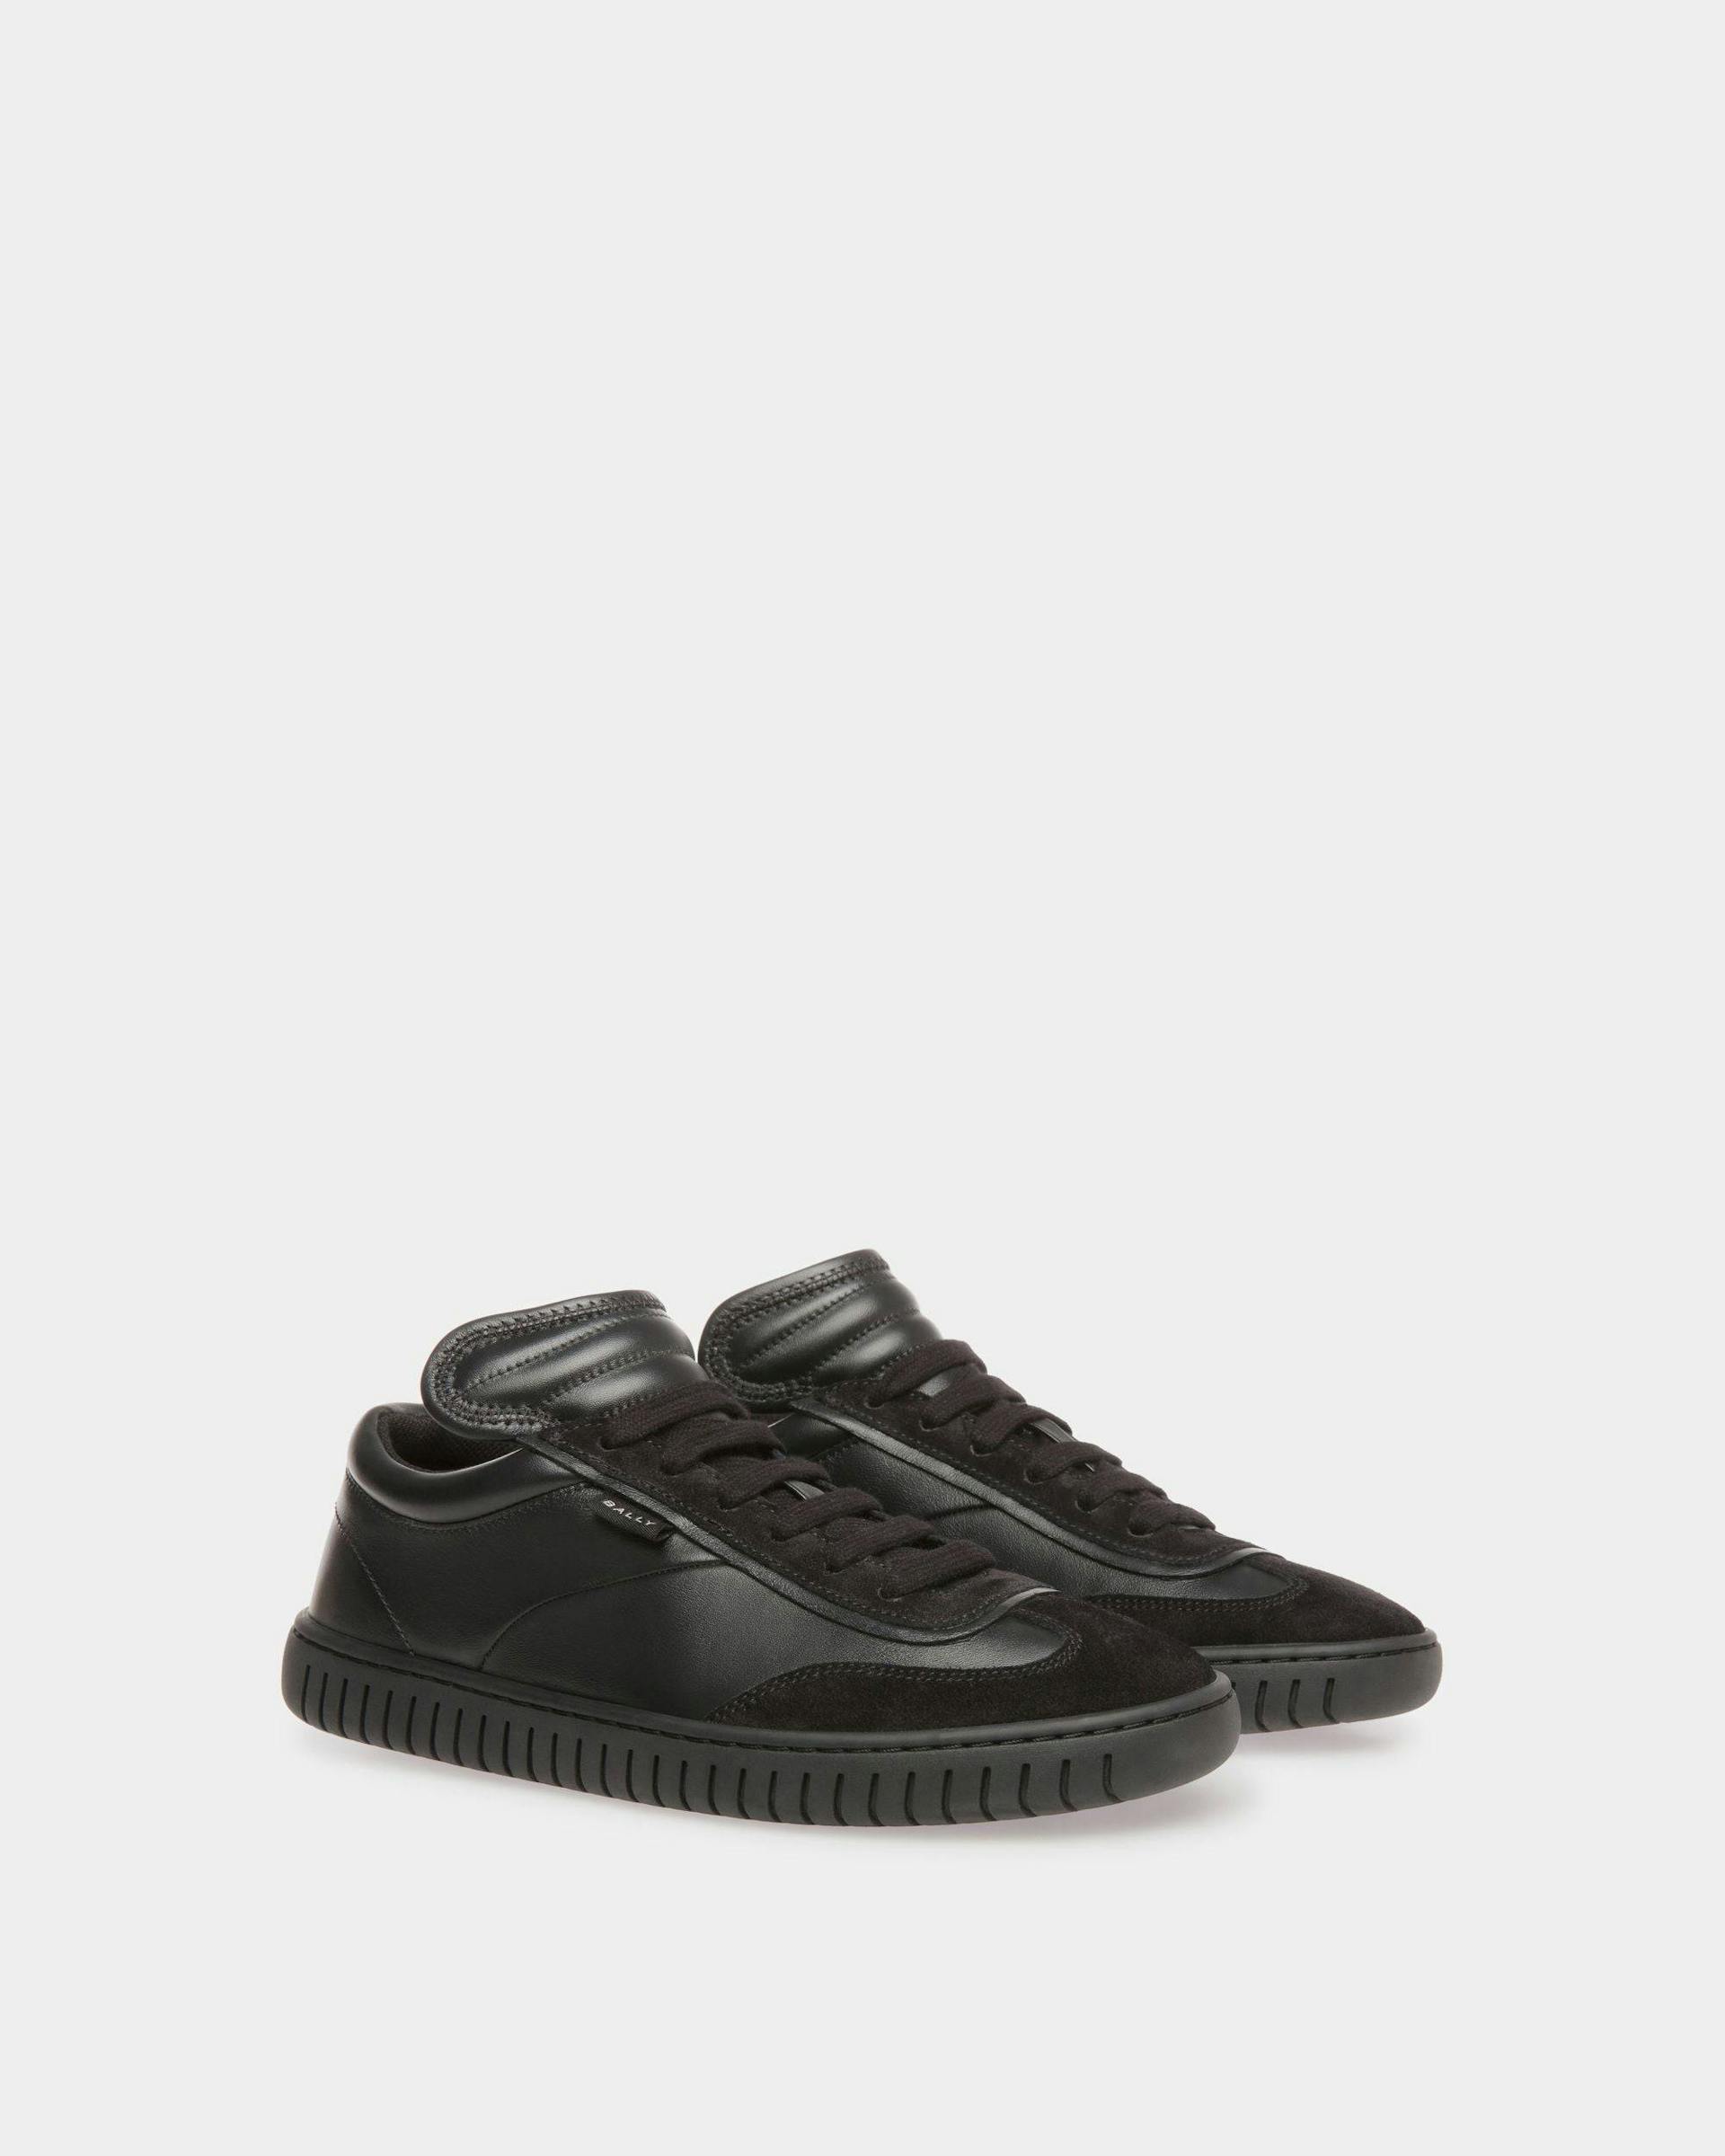 Player Sneakers In Black Leather - Women's - Bally - 02